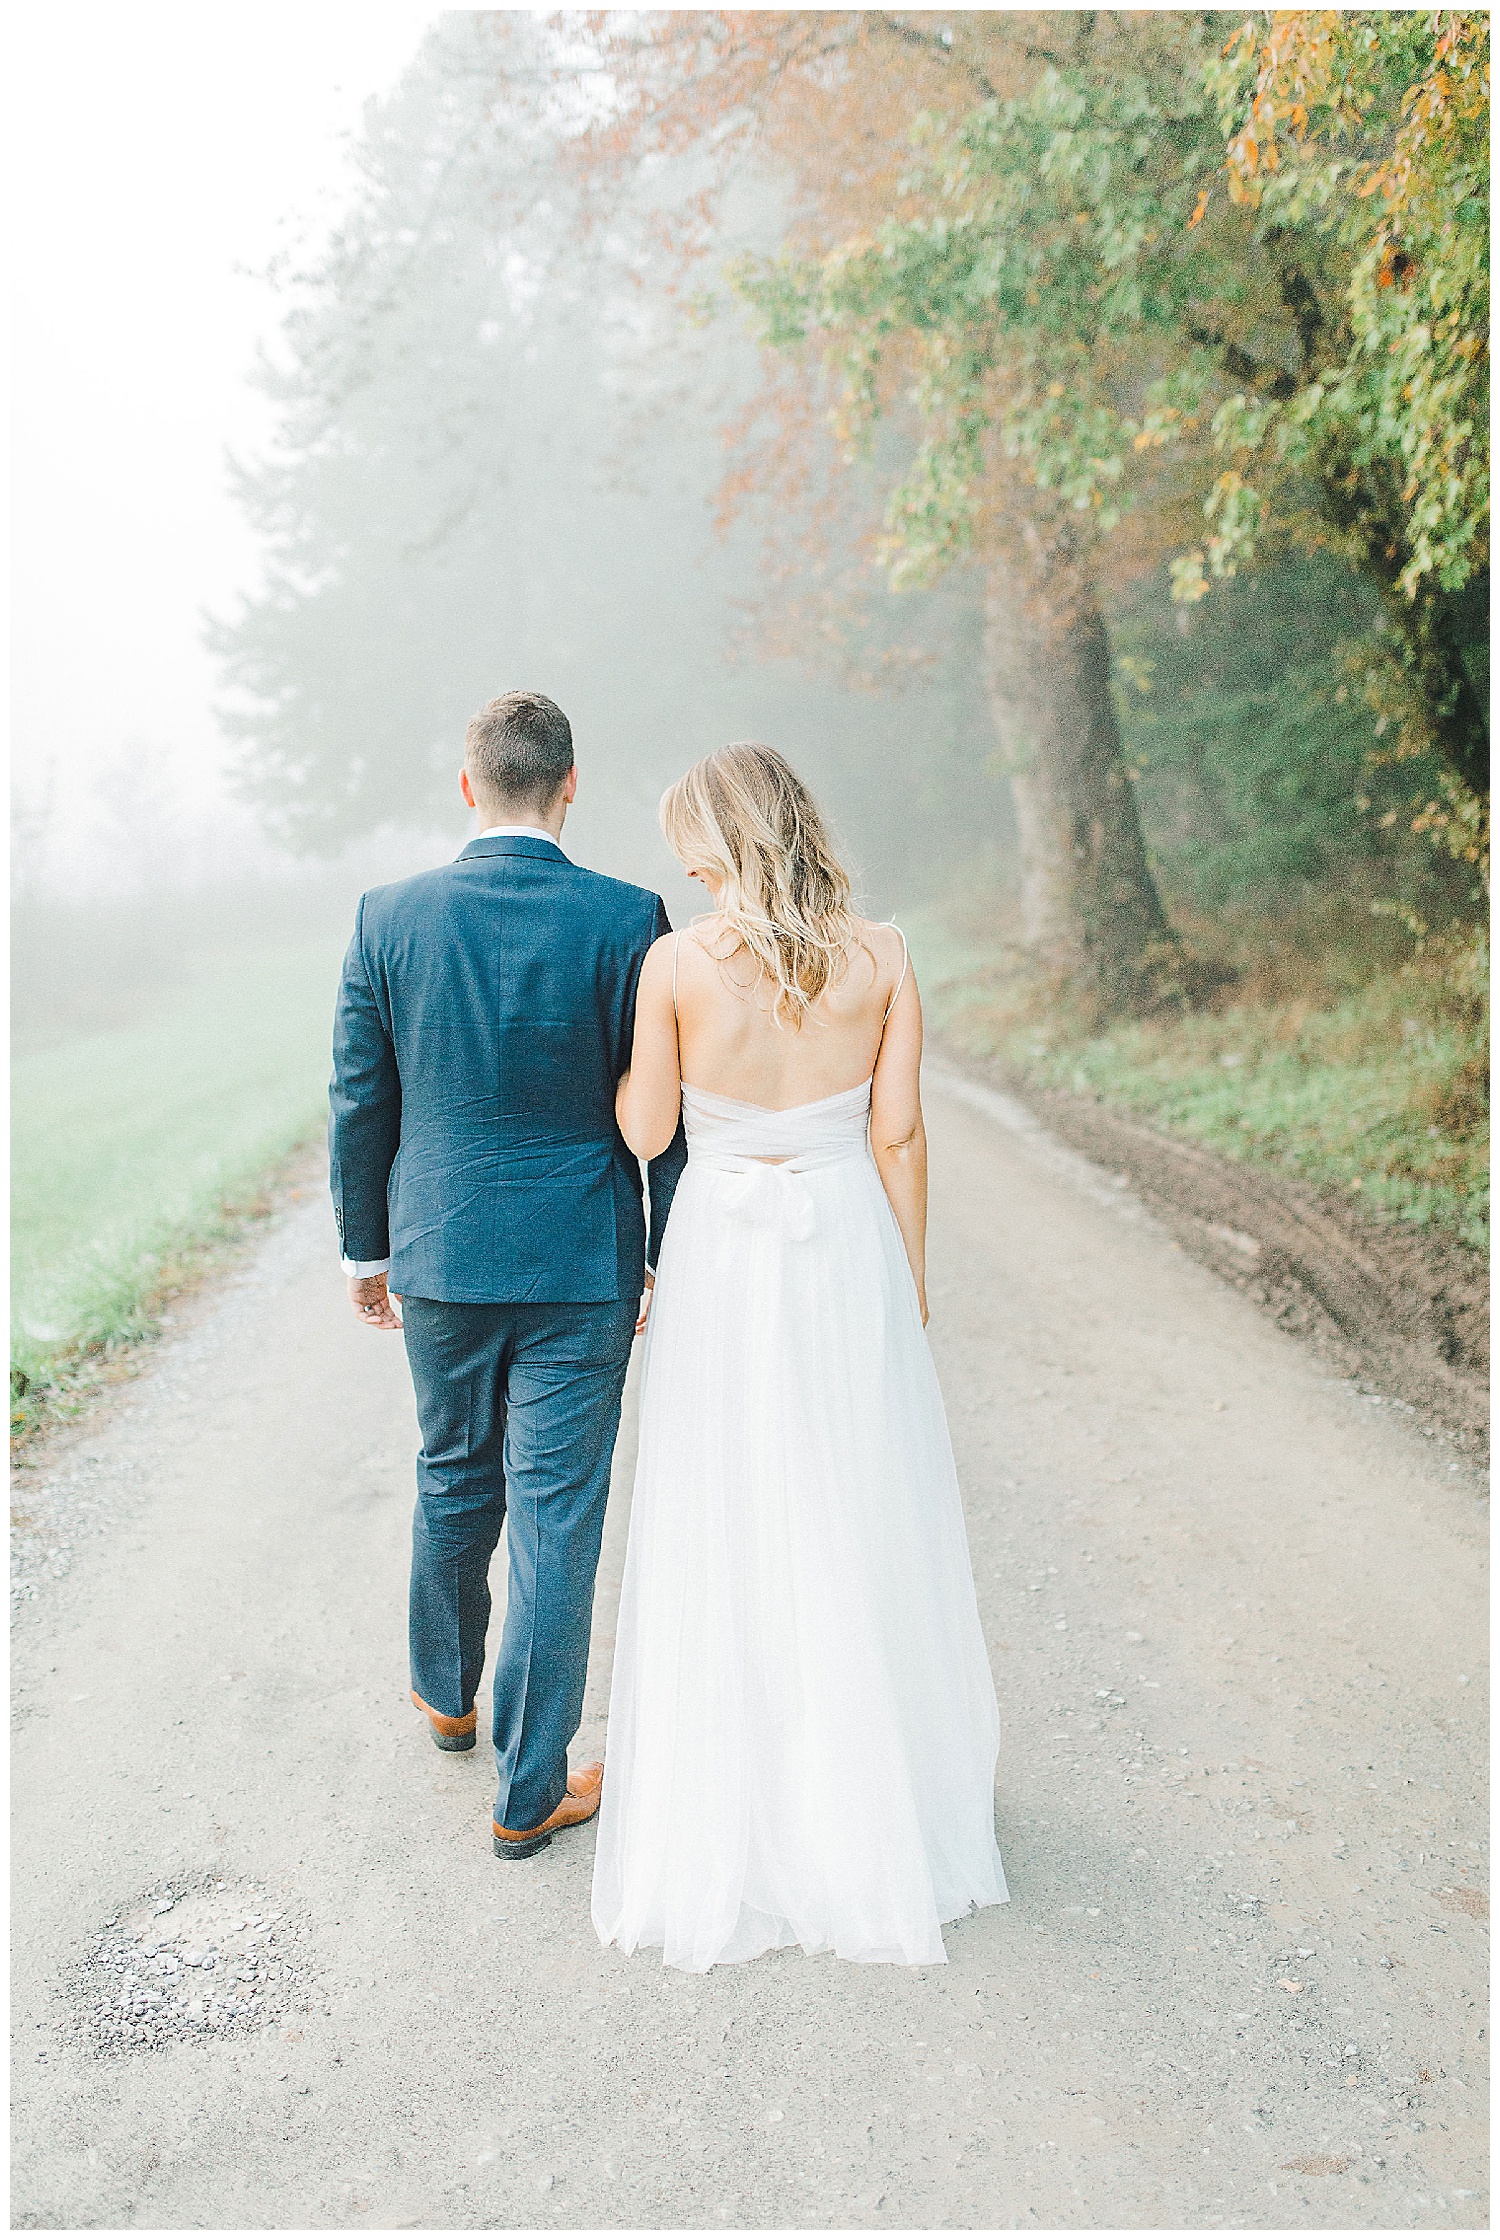 Emma Rose Company recently got to travel all the way to Nashville to photograph the most beautiful post-wedding bride and groom portraits in the Great Smoky Mountains with a gorgeous couple! Nashville wedding inspiration at it's finest._0018.jpg